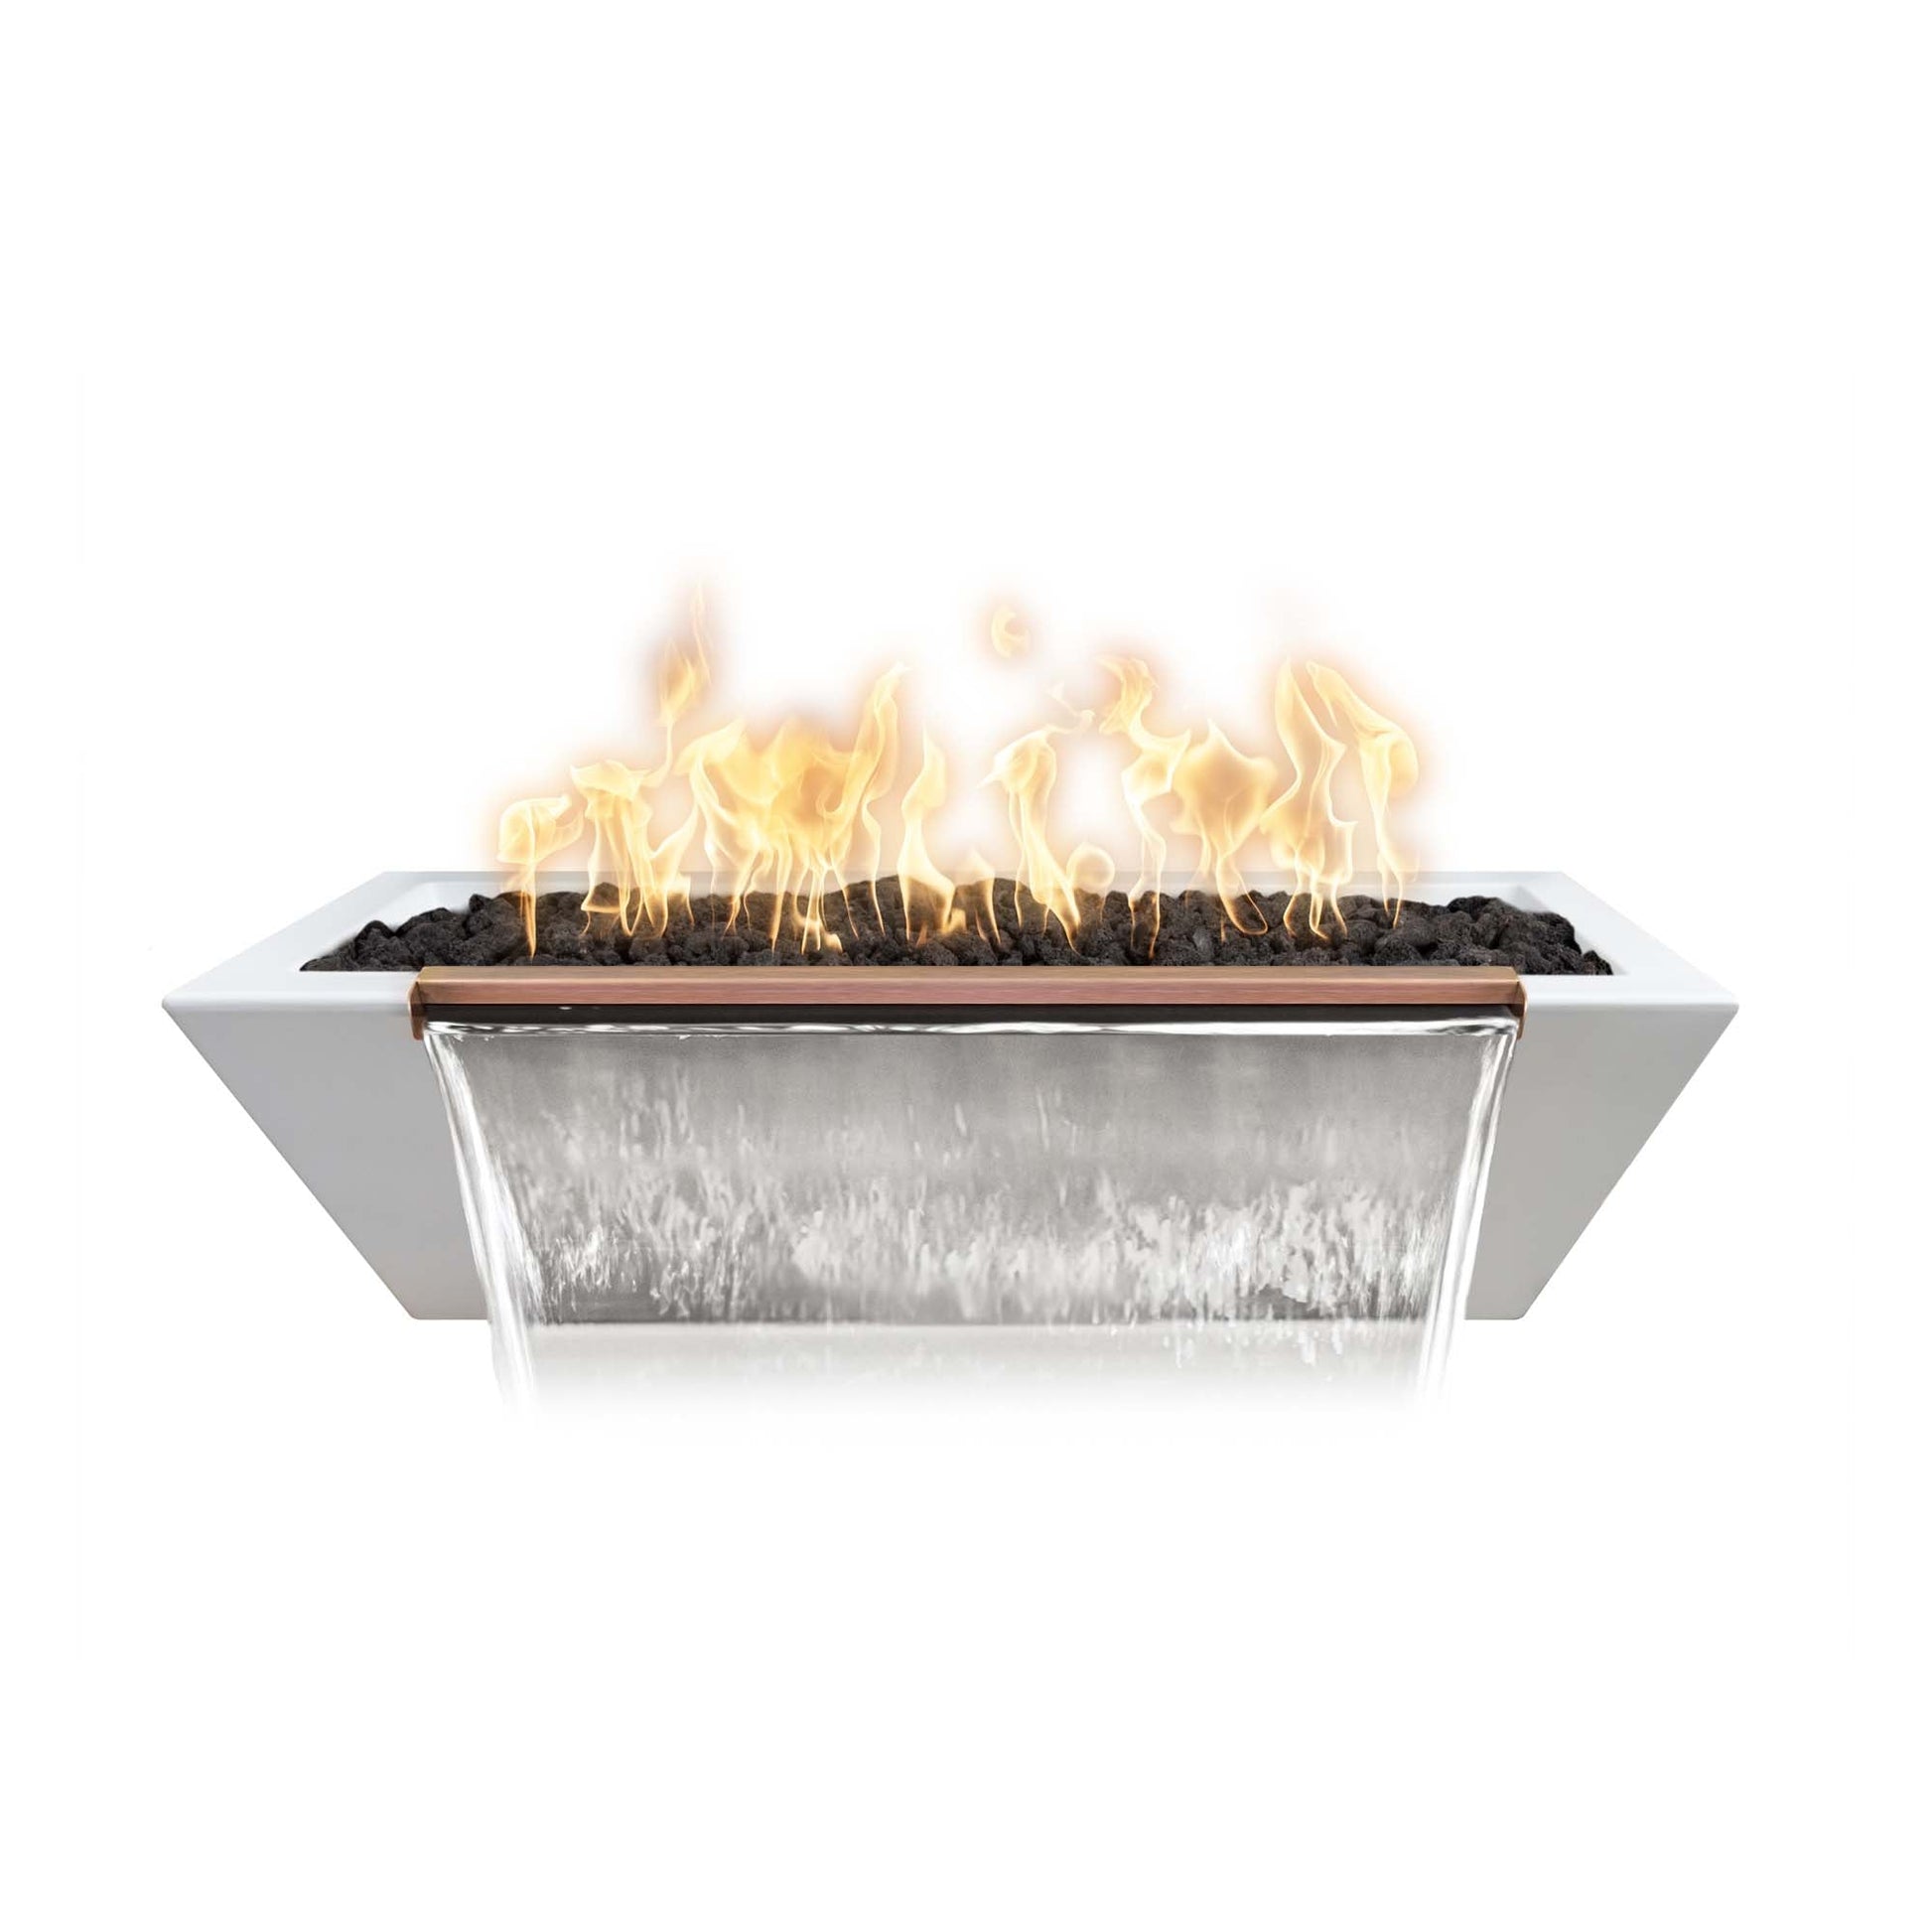 The Outdoor Plus Linear Maya 72" Ash GFRC Concrete Liquid Propane Fire & Water Bowl with Match Lit Ignition